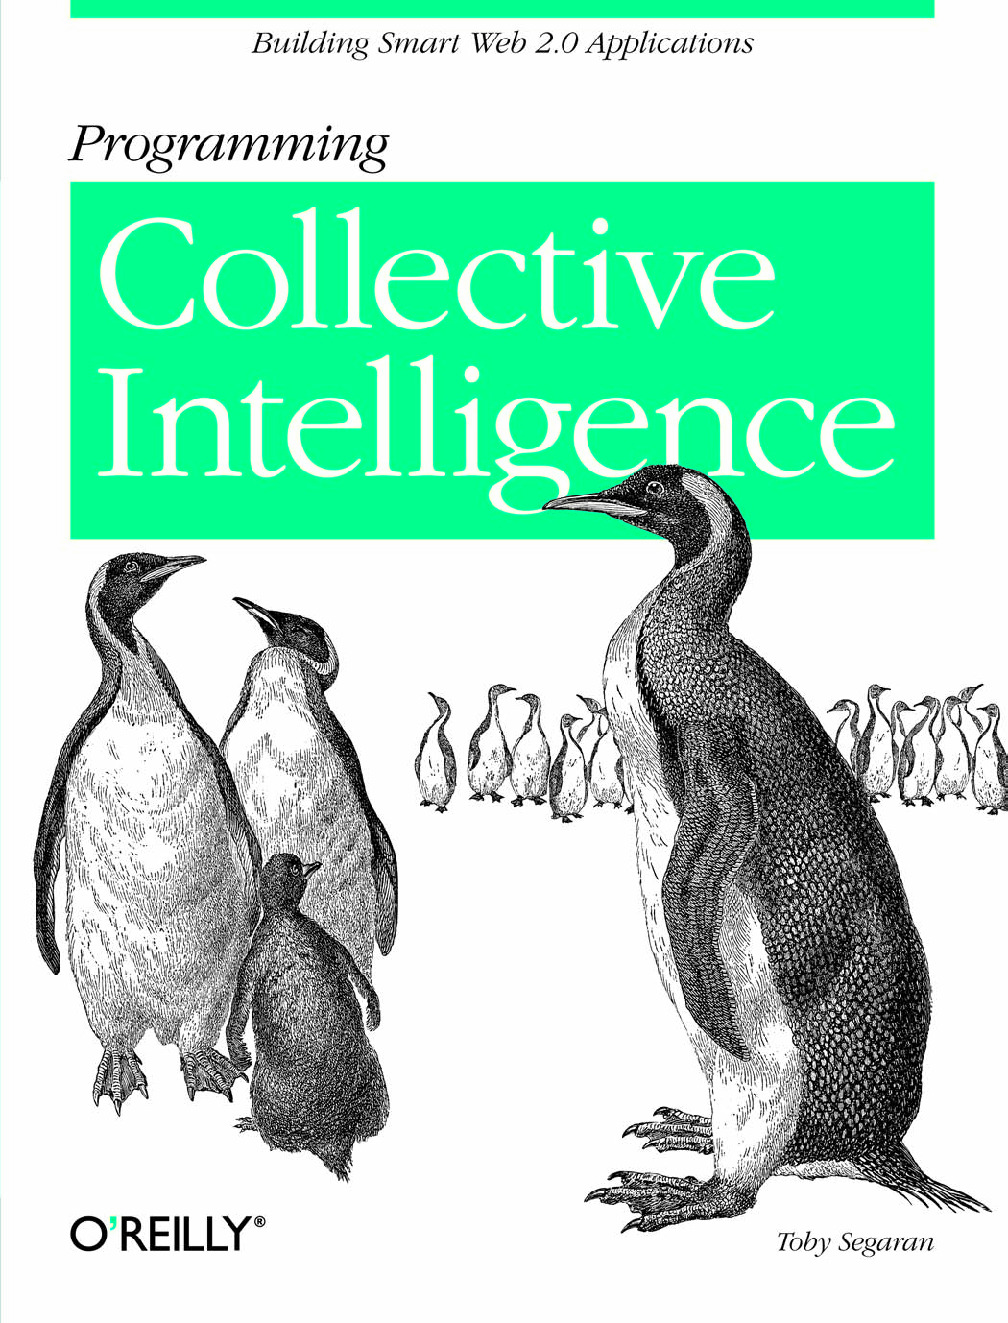 programming.collective.intelligence.aug.2007